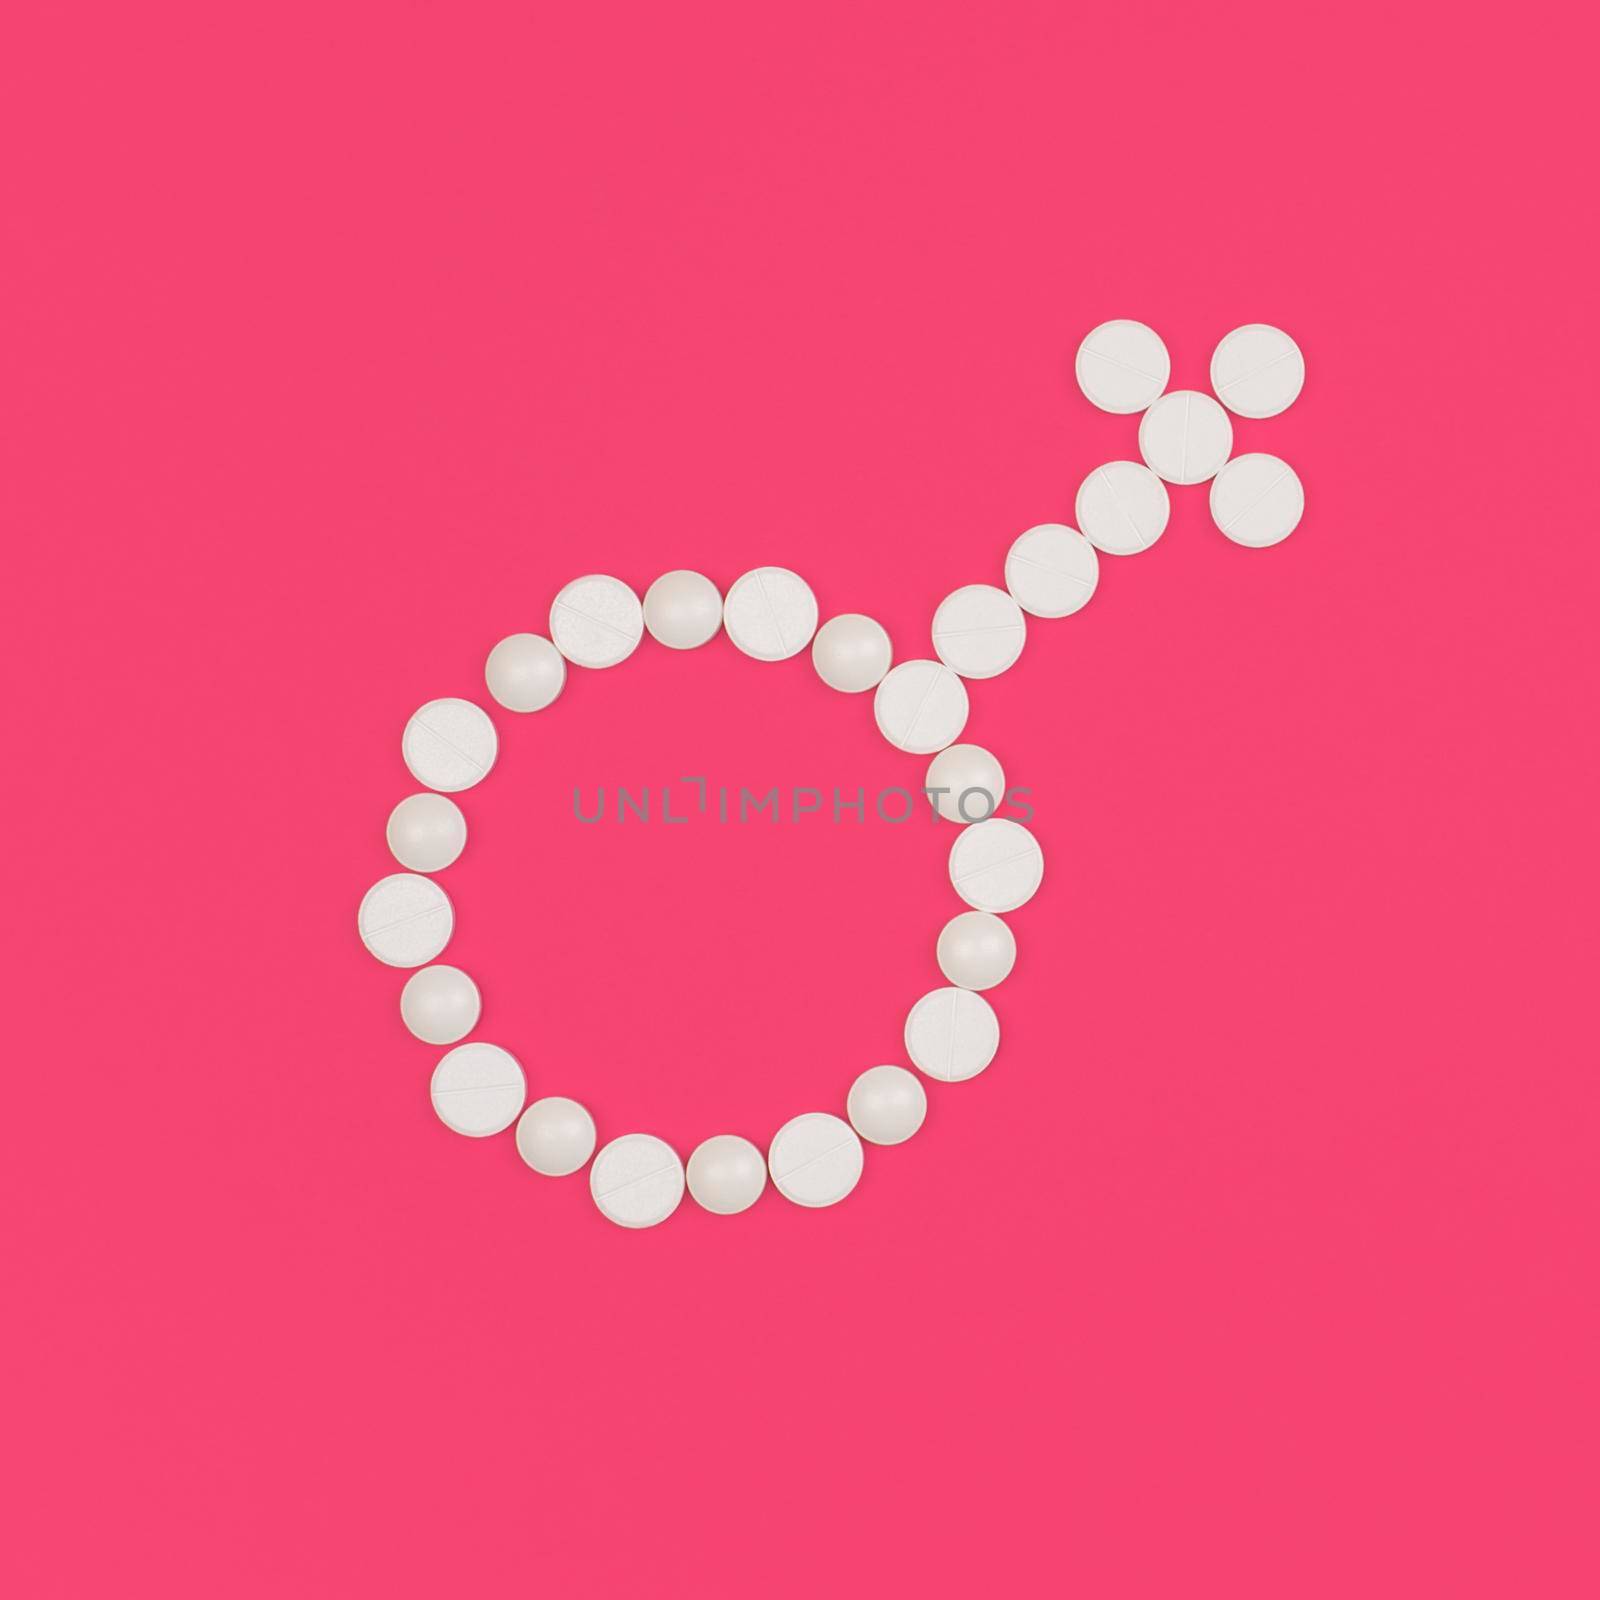 Medical background with pills. Female contraception concept. Gender symbol made from white pills or tablets on pink background. Flat lay